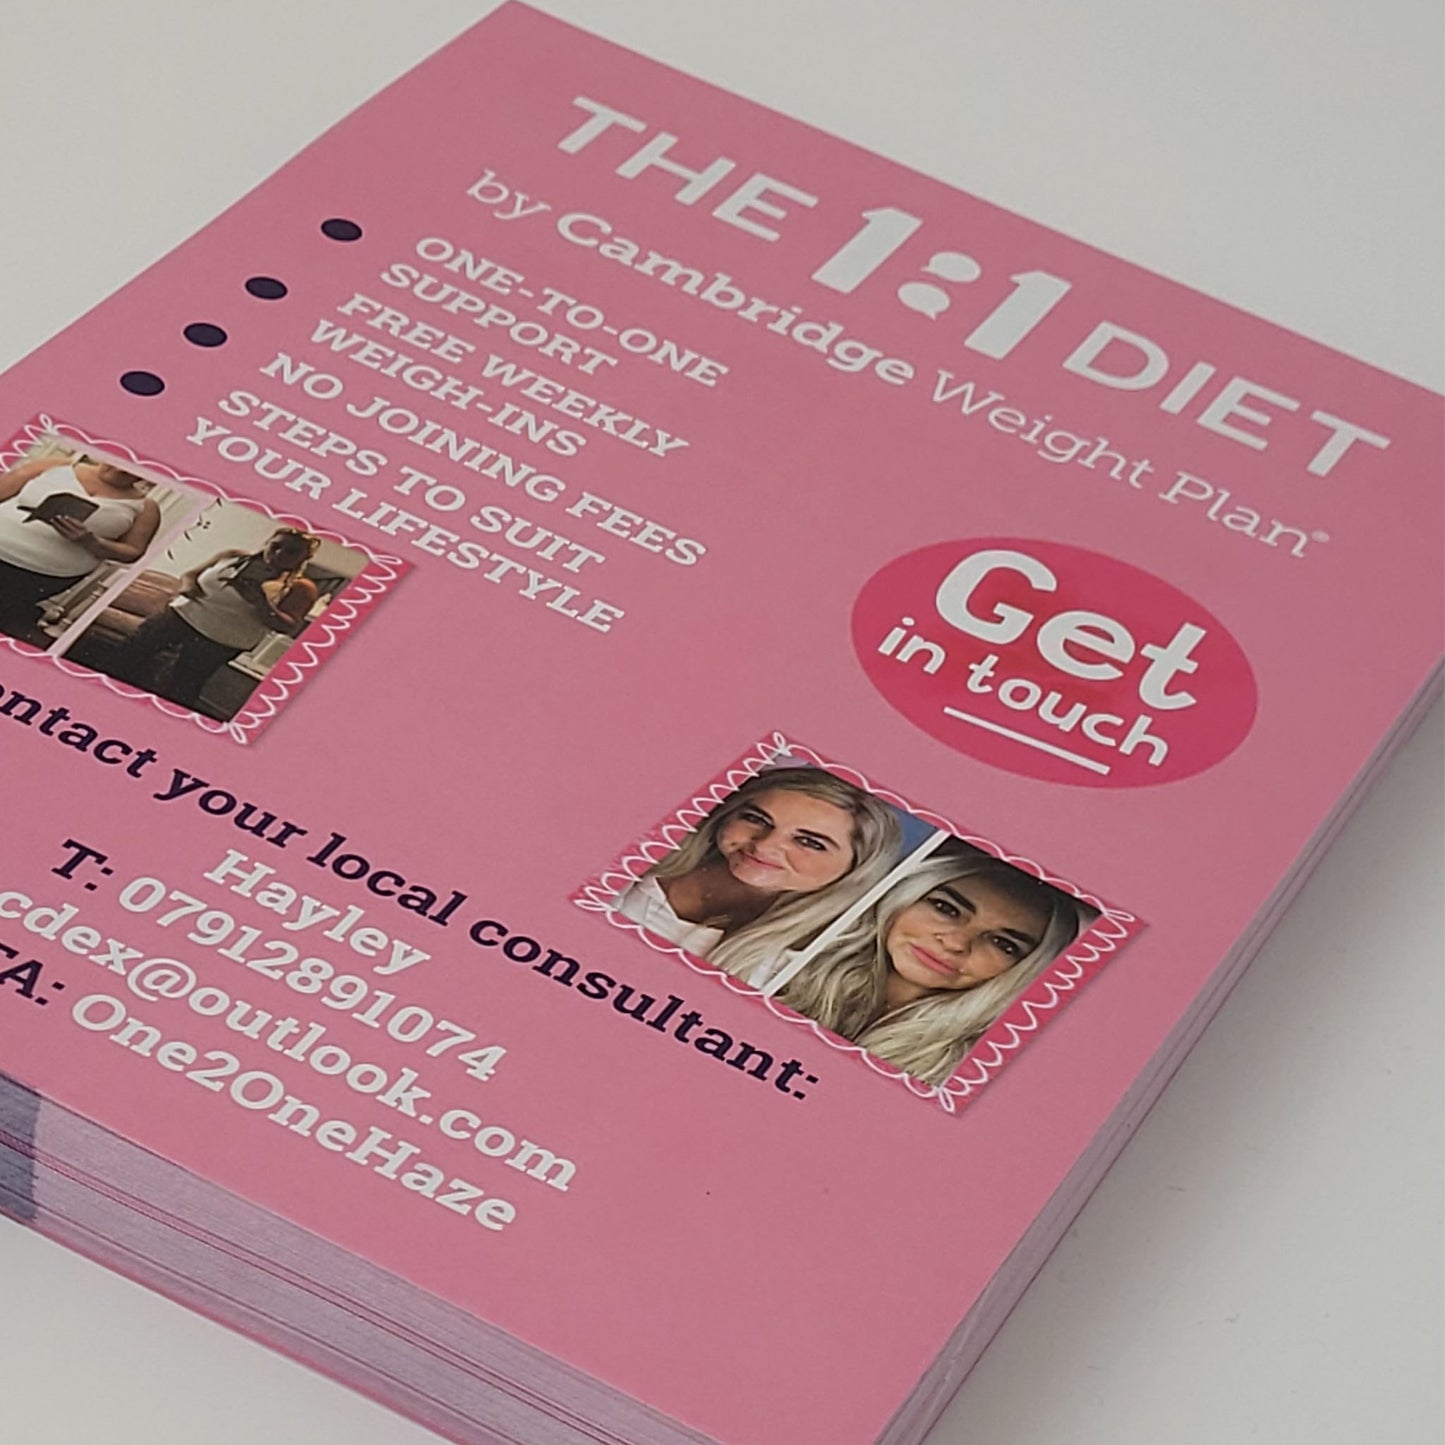 The 1:1 Diet - Double Sided Flyer